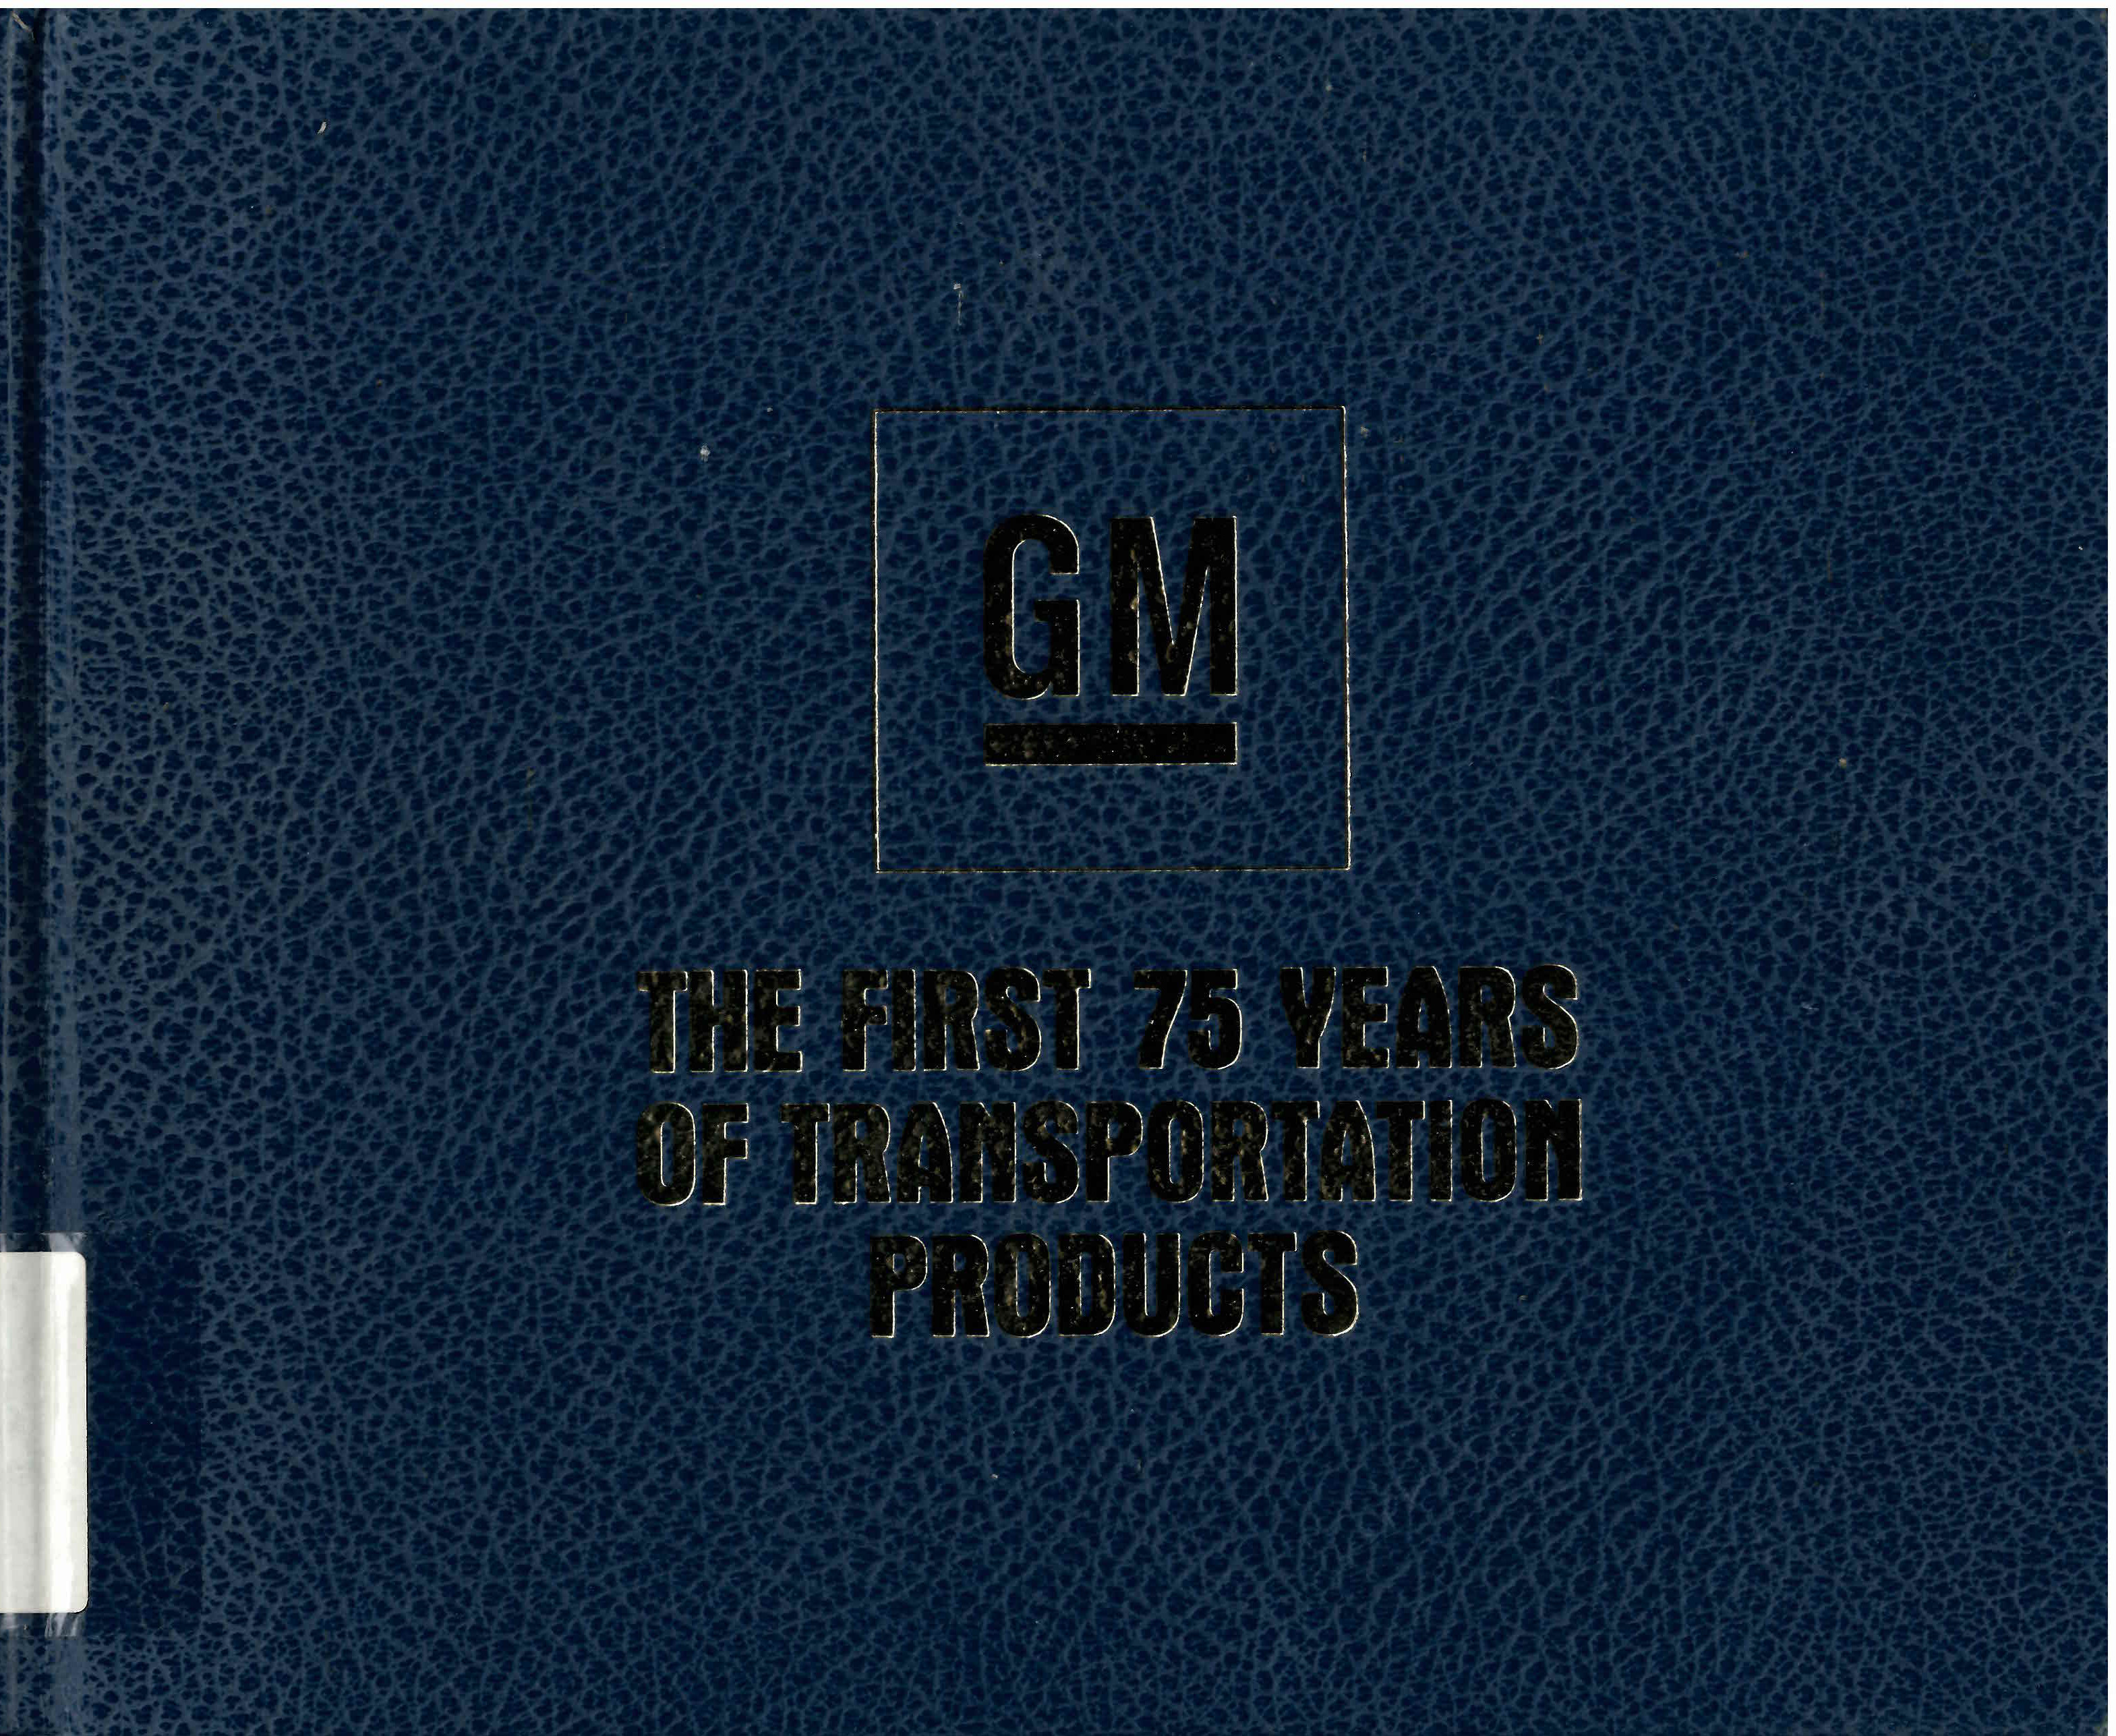 General Motors : the first 75 years of transportation  products